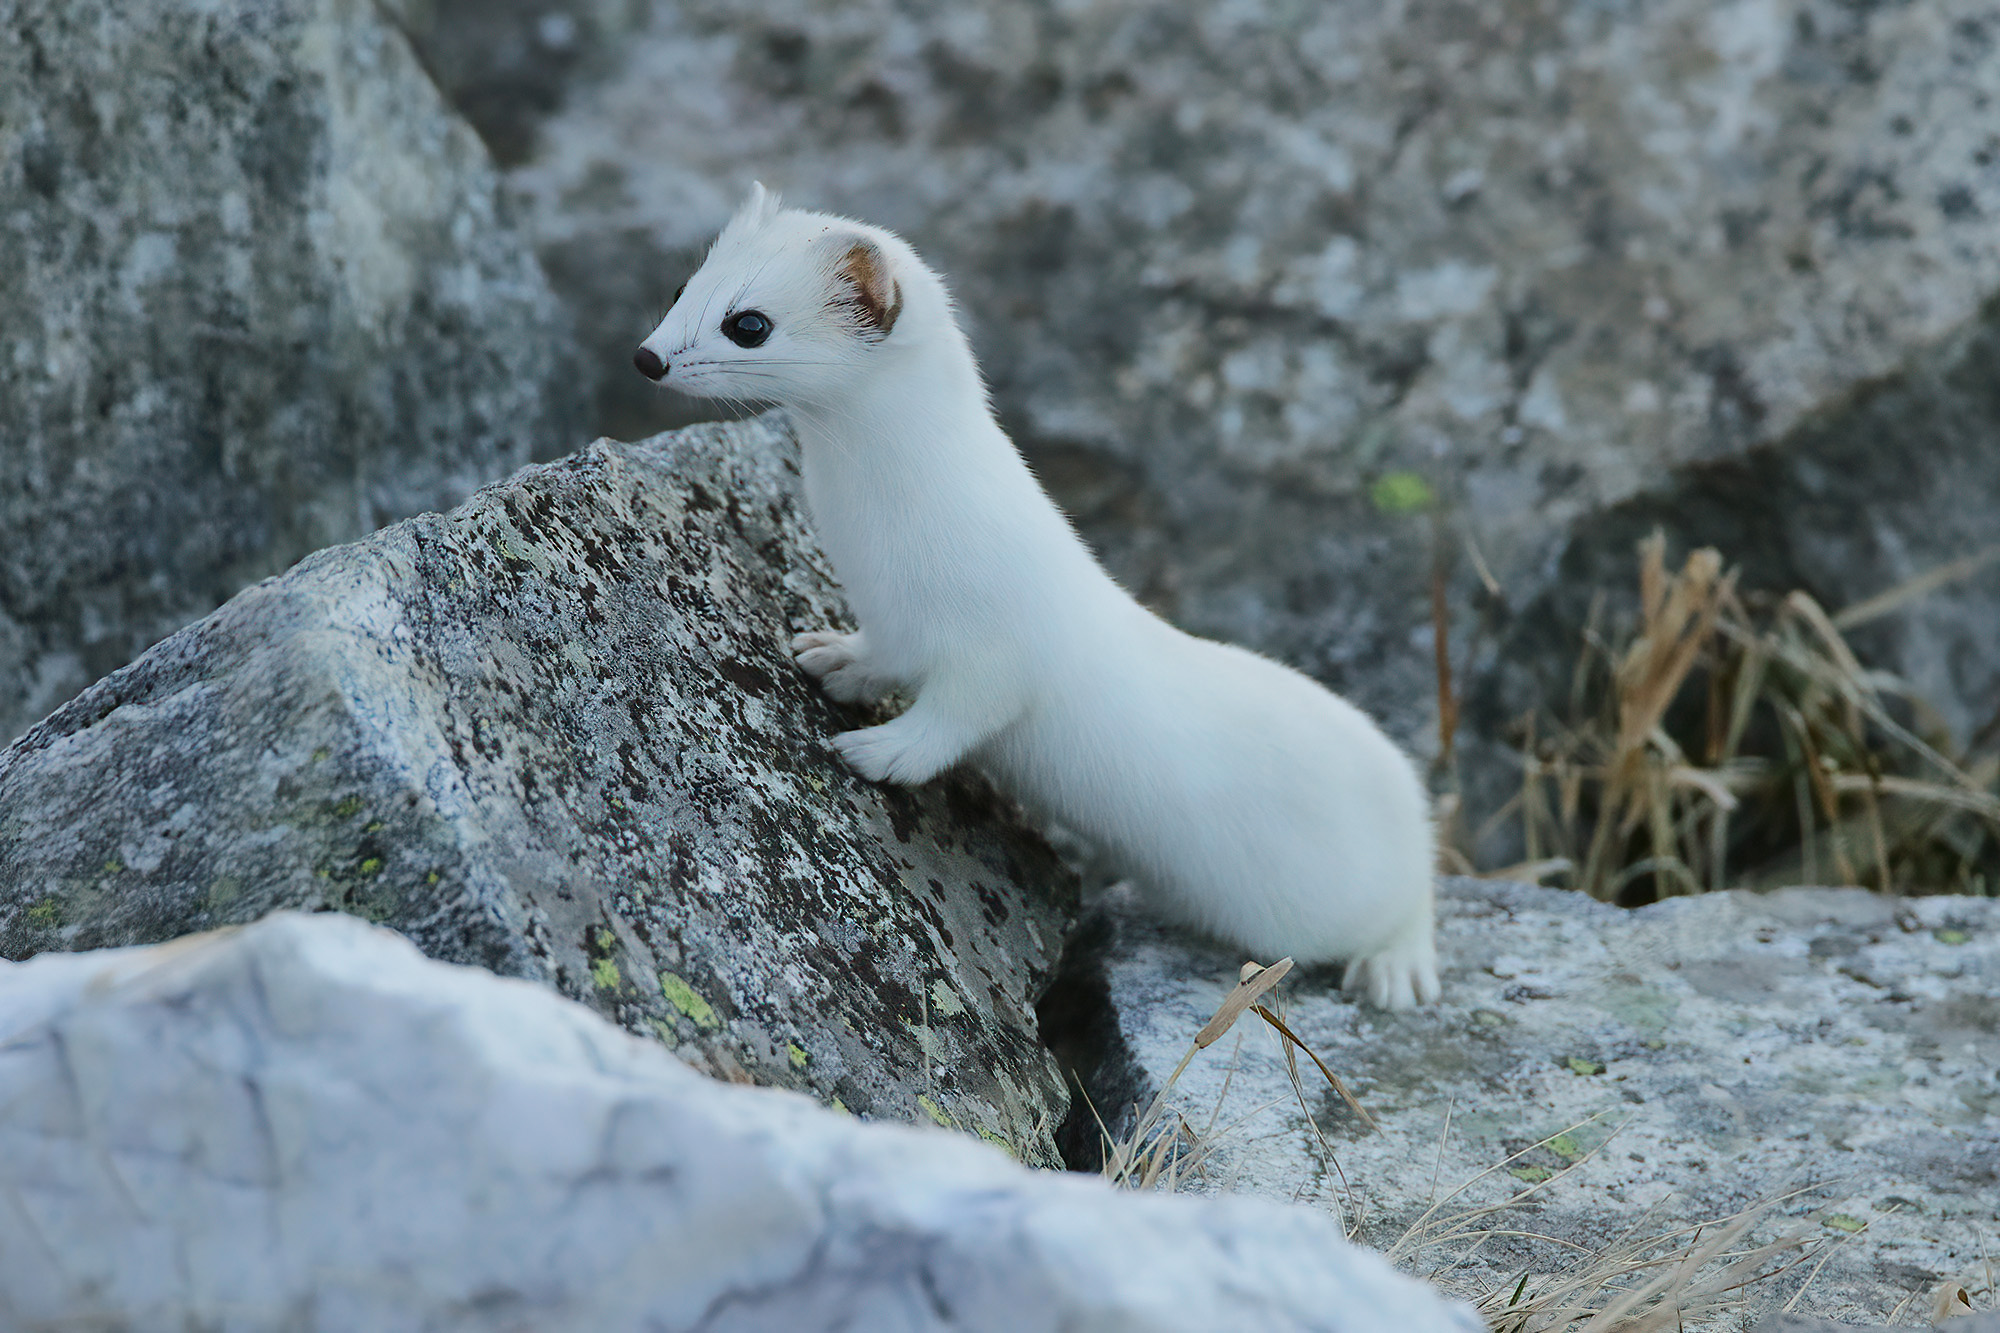 a sinuous body, winter ermine...